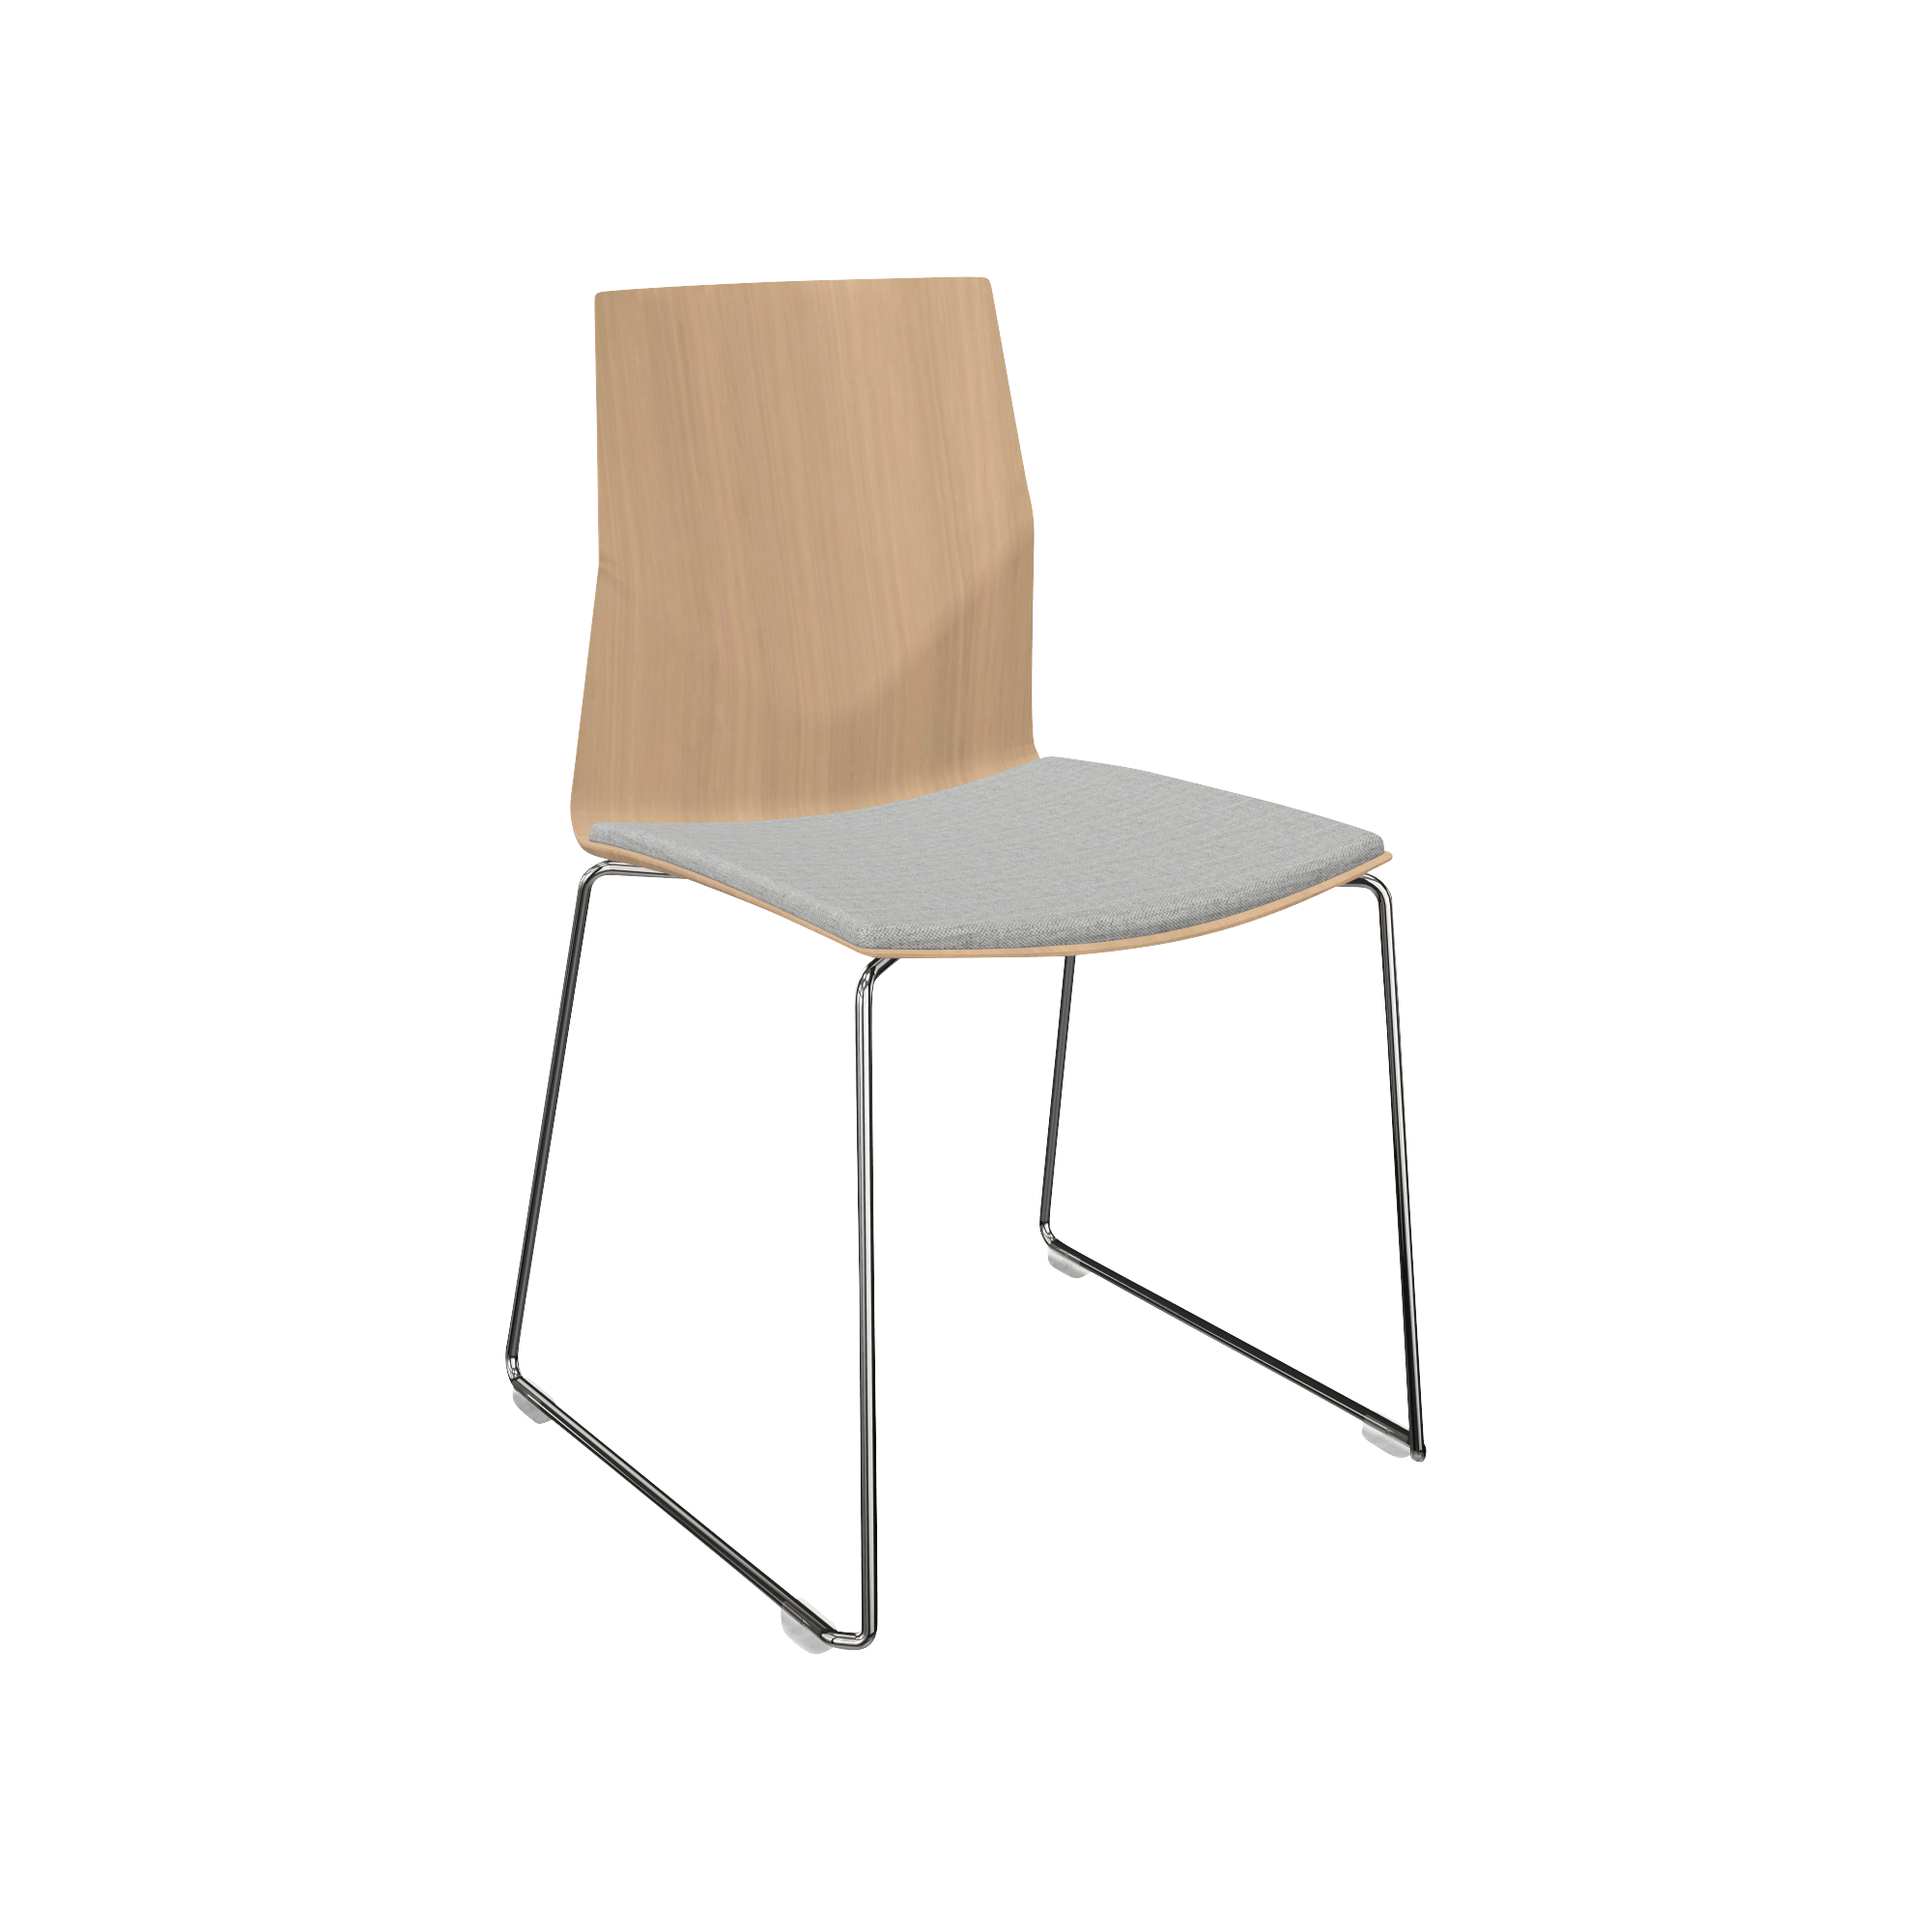 wooden chair with grey seat and metal legs